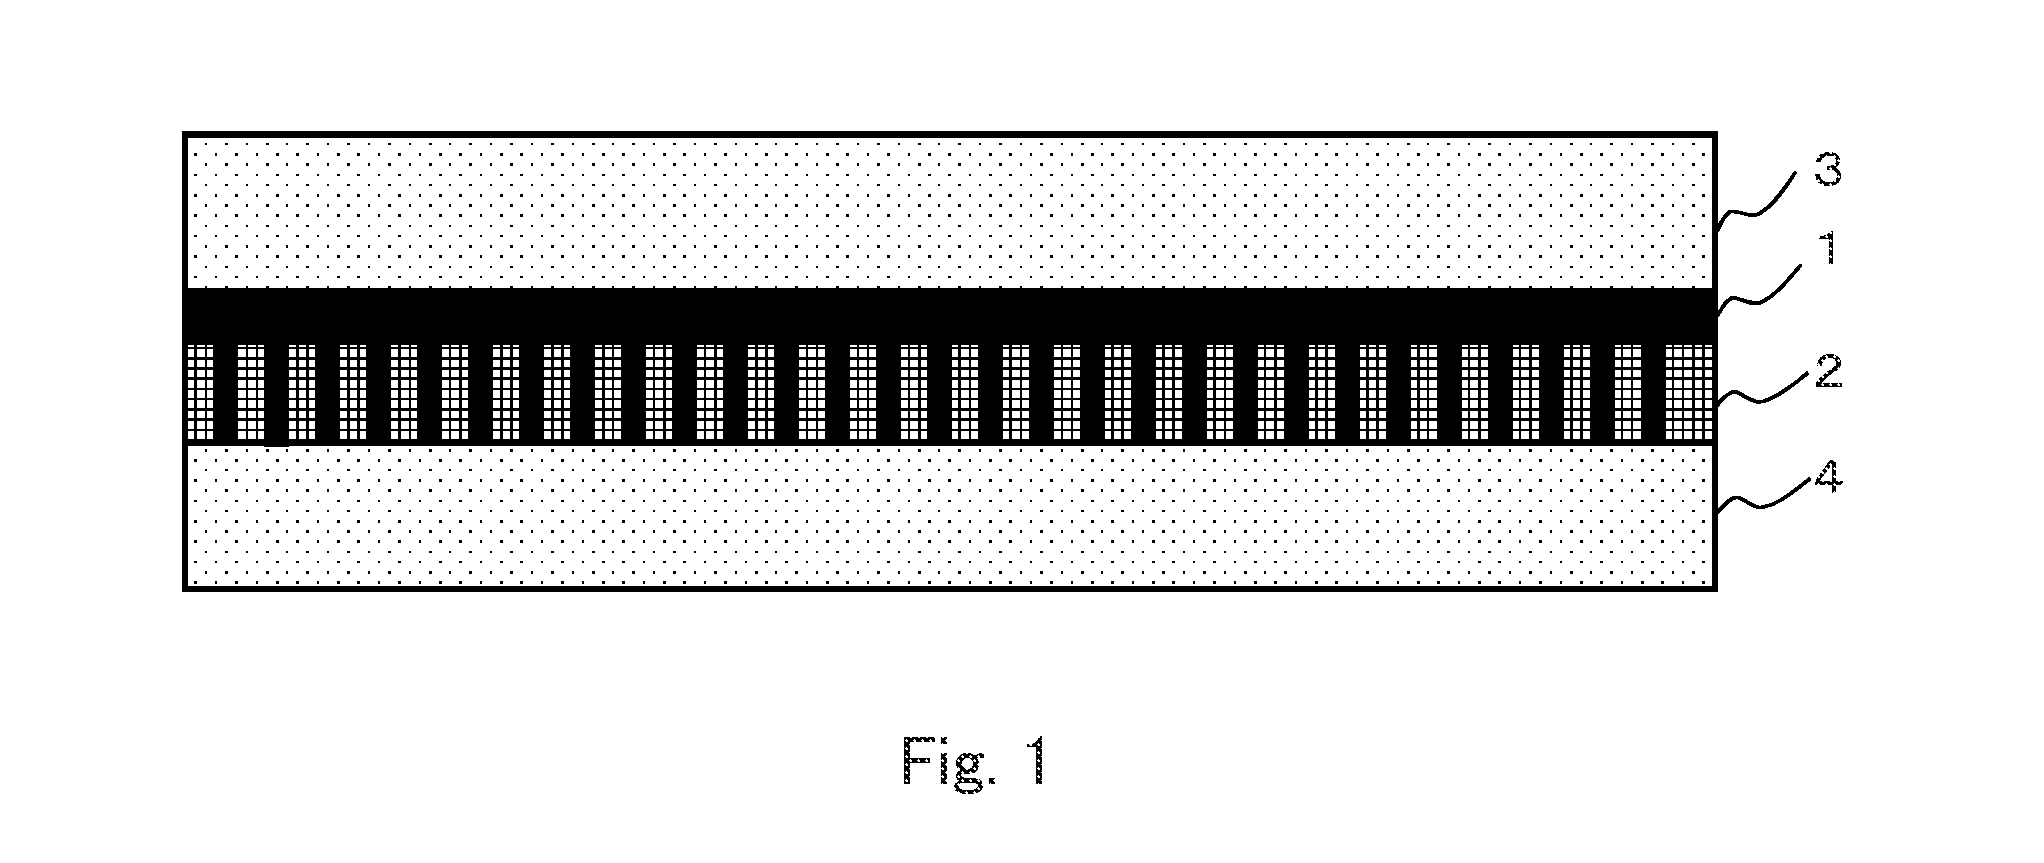 Facilitated co2 transport membrane and method for producing same, and method and apparatus for separating co2